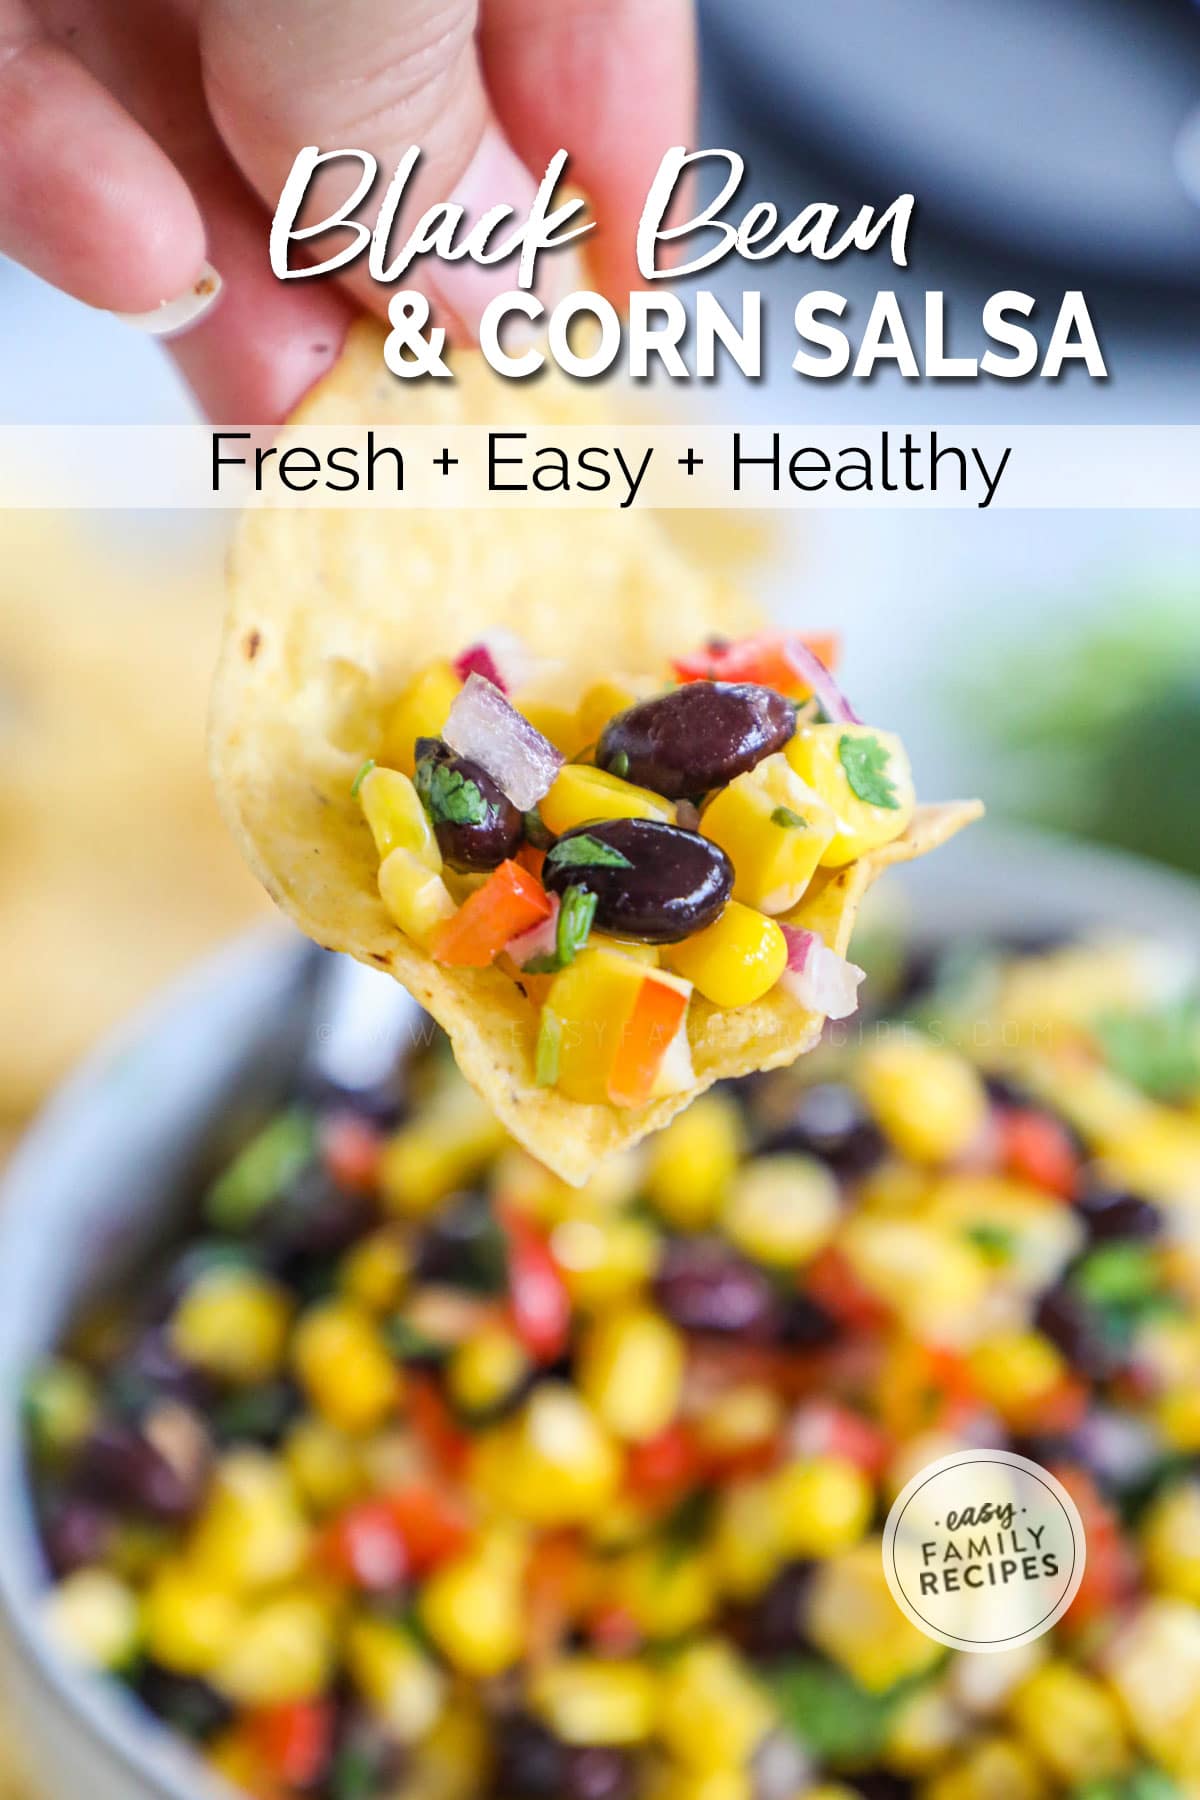 Chip scooping chunky black bean and corn salsa up to eat as a dip